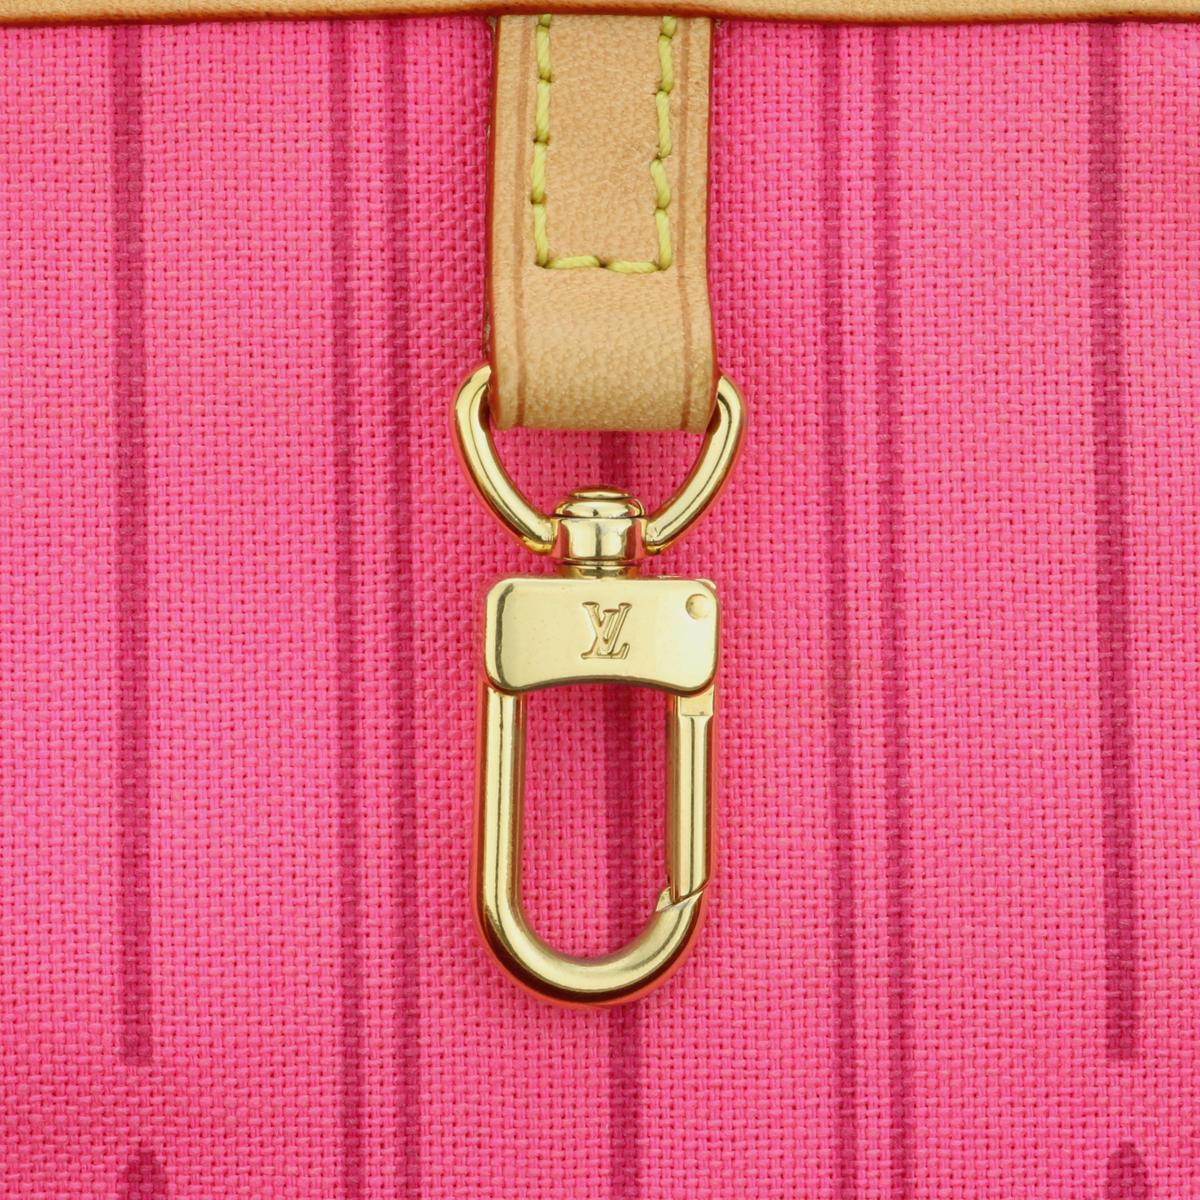 Louis Vuitton Neverfull MM Bag in Monogram Roses 2009 Limited Edition For Sale 12